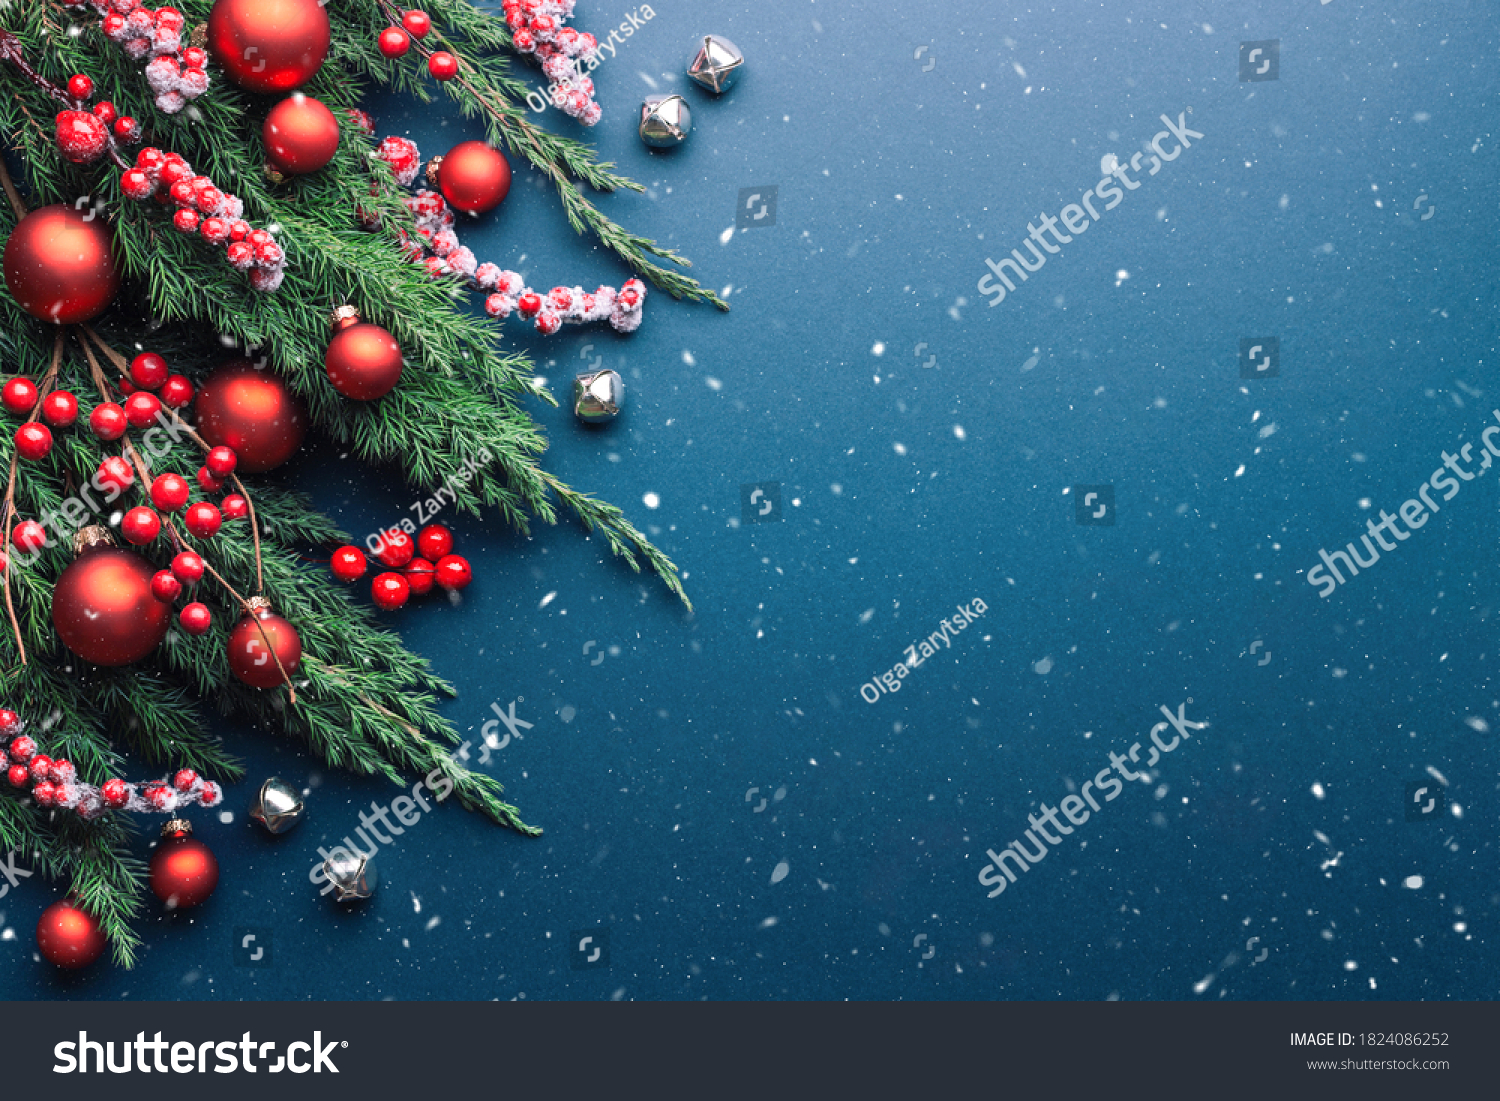 Christmas border with fir branches and red decorations on blue background with snow. #1824086252